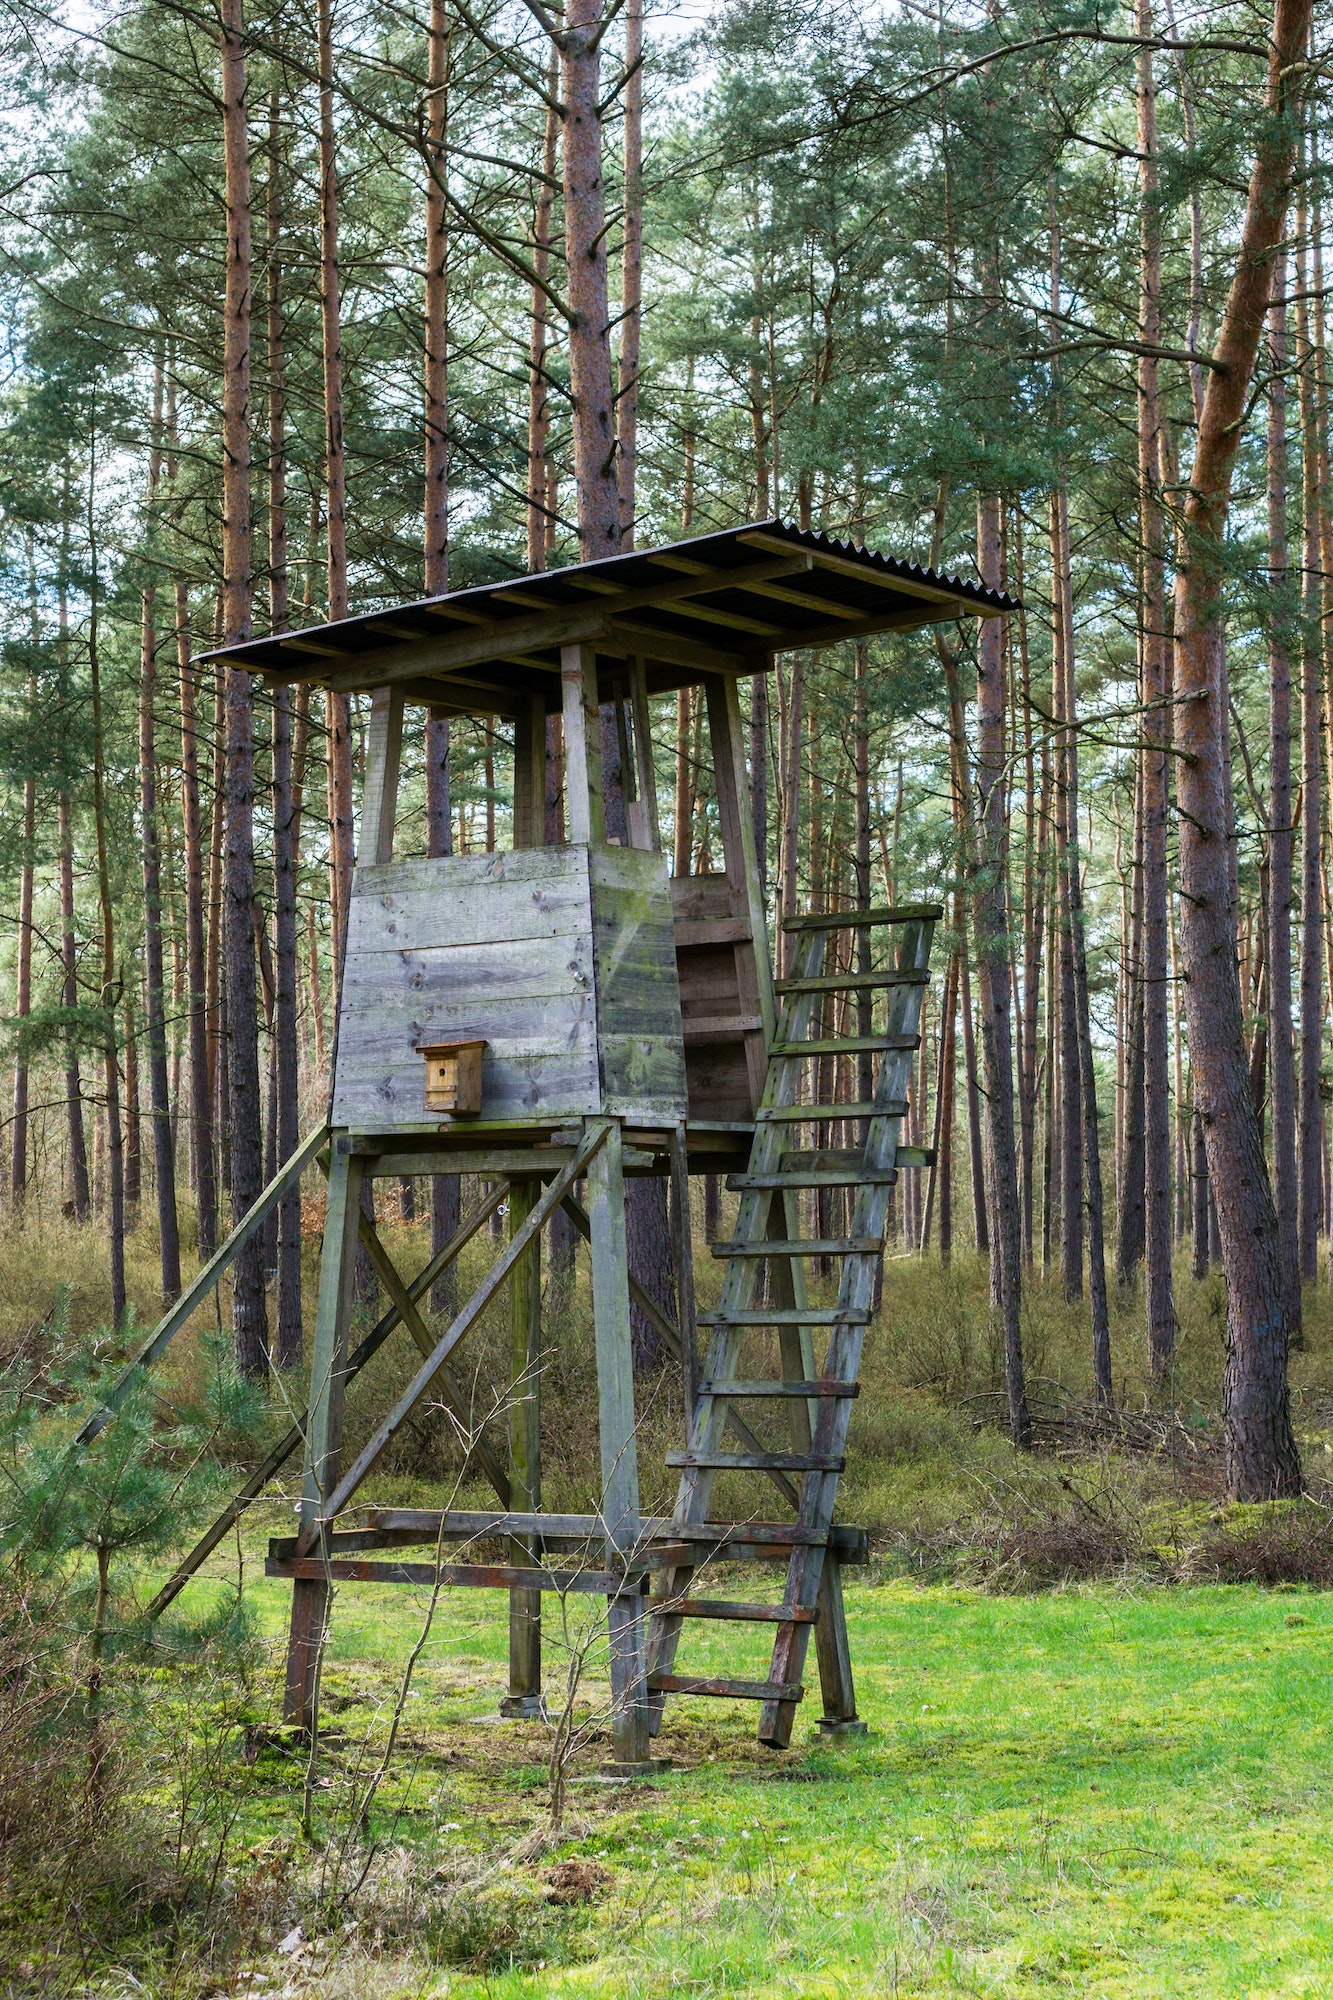 A wooden observation or hunting tower